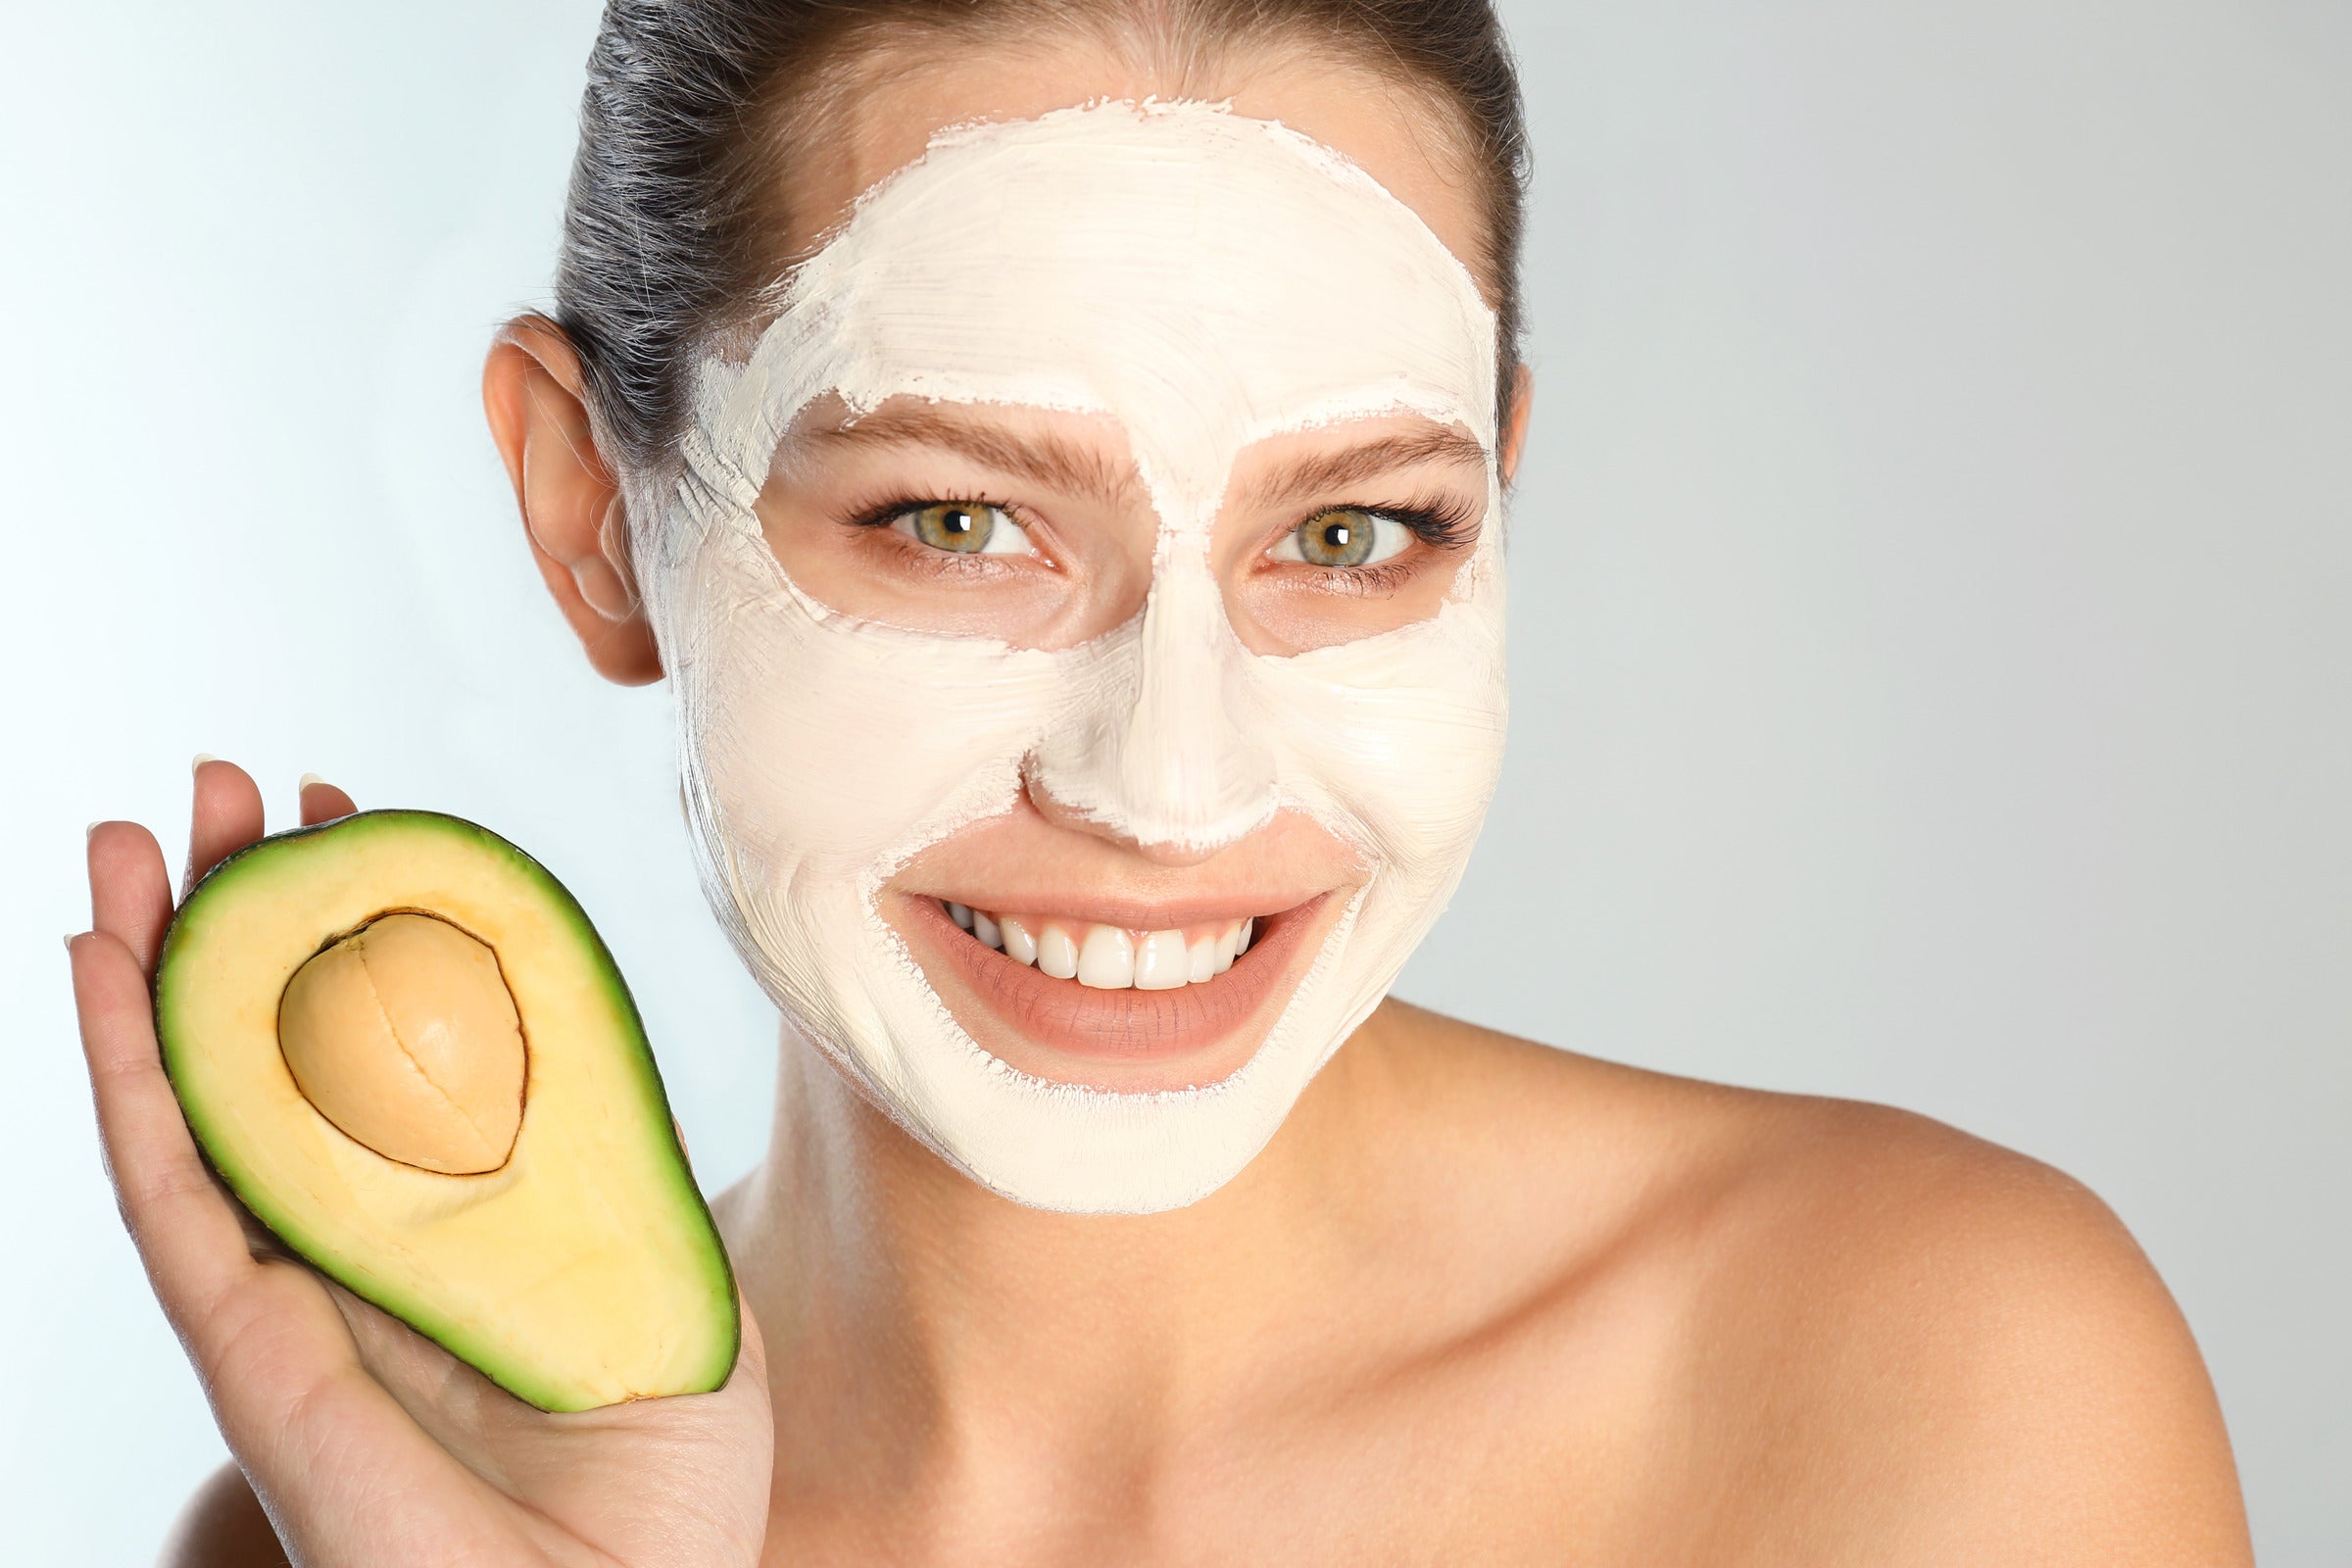 4 DIY Face Mask Recipes for Dry Skin